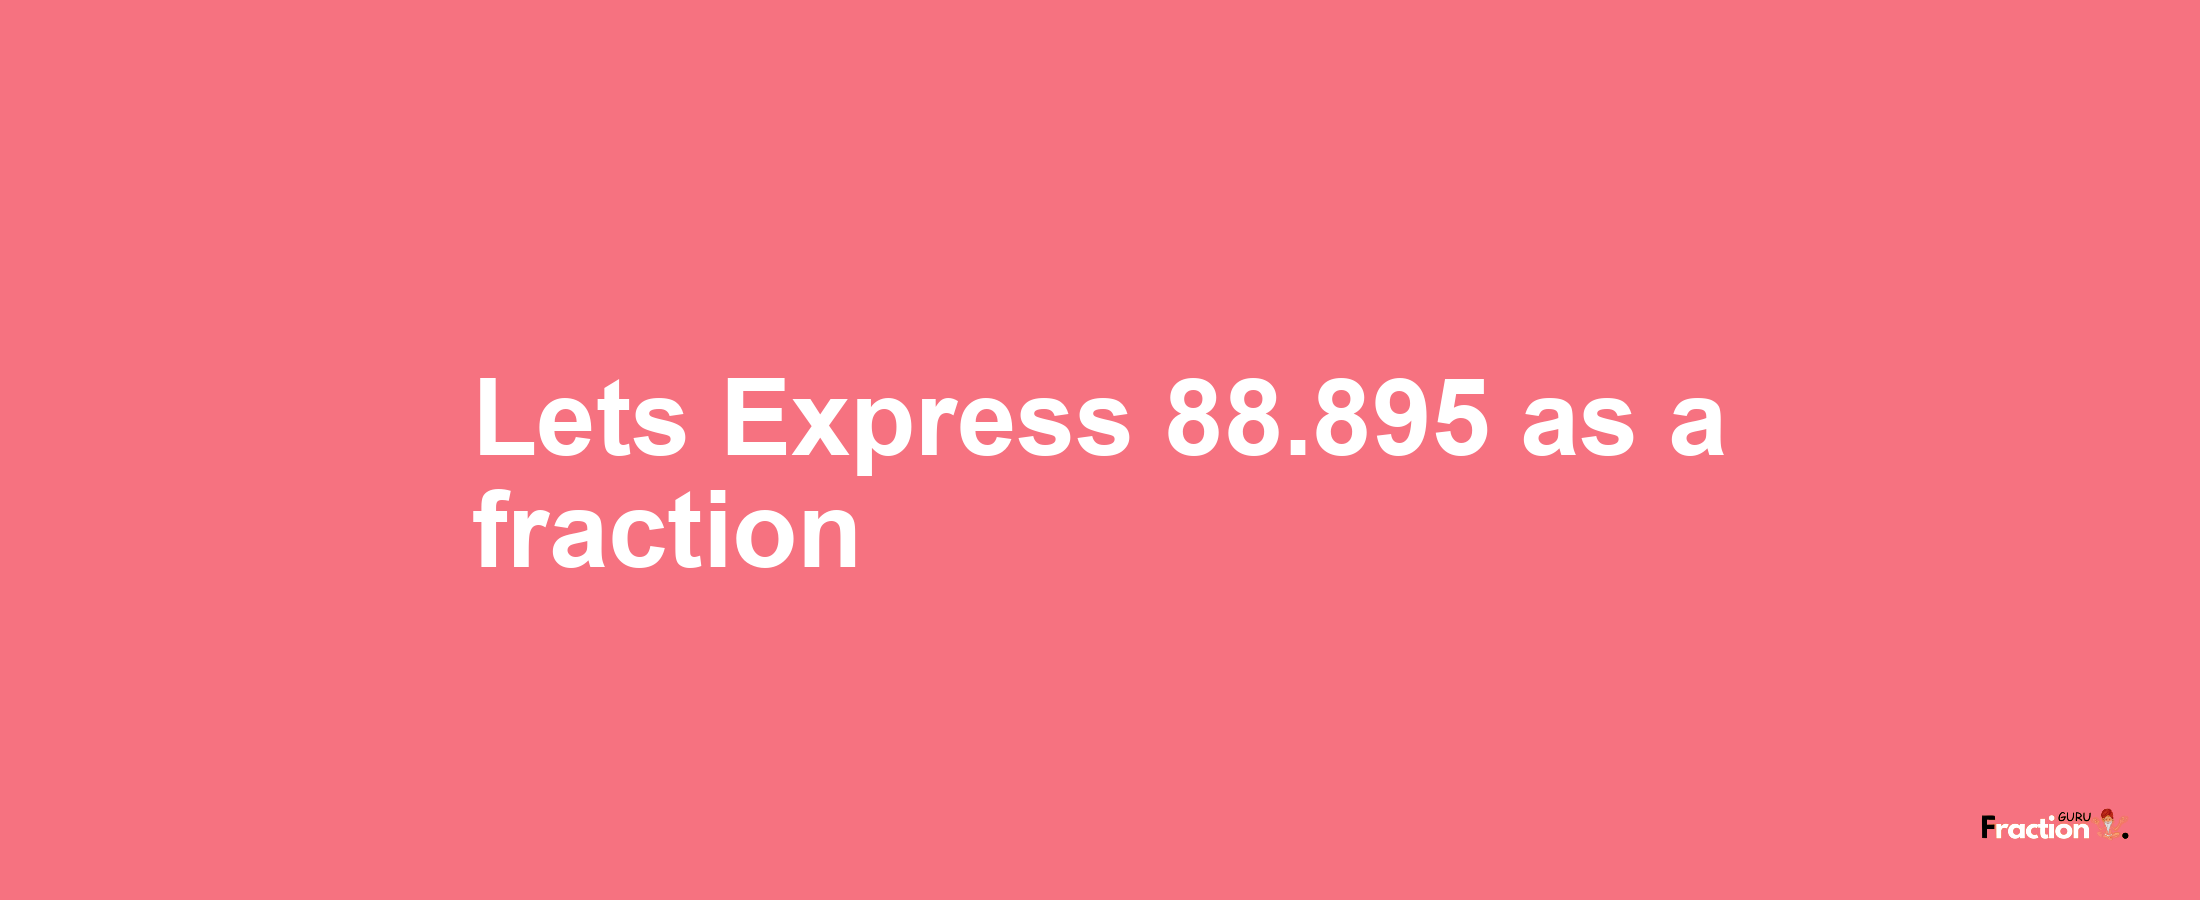 Lets Express 88.895 as afraction